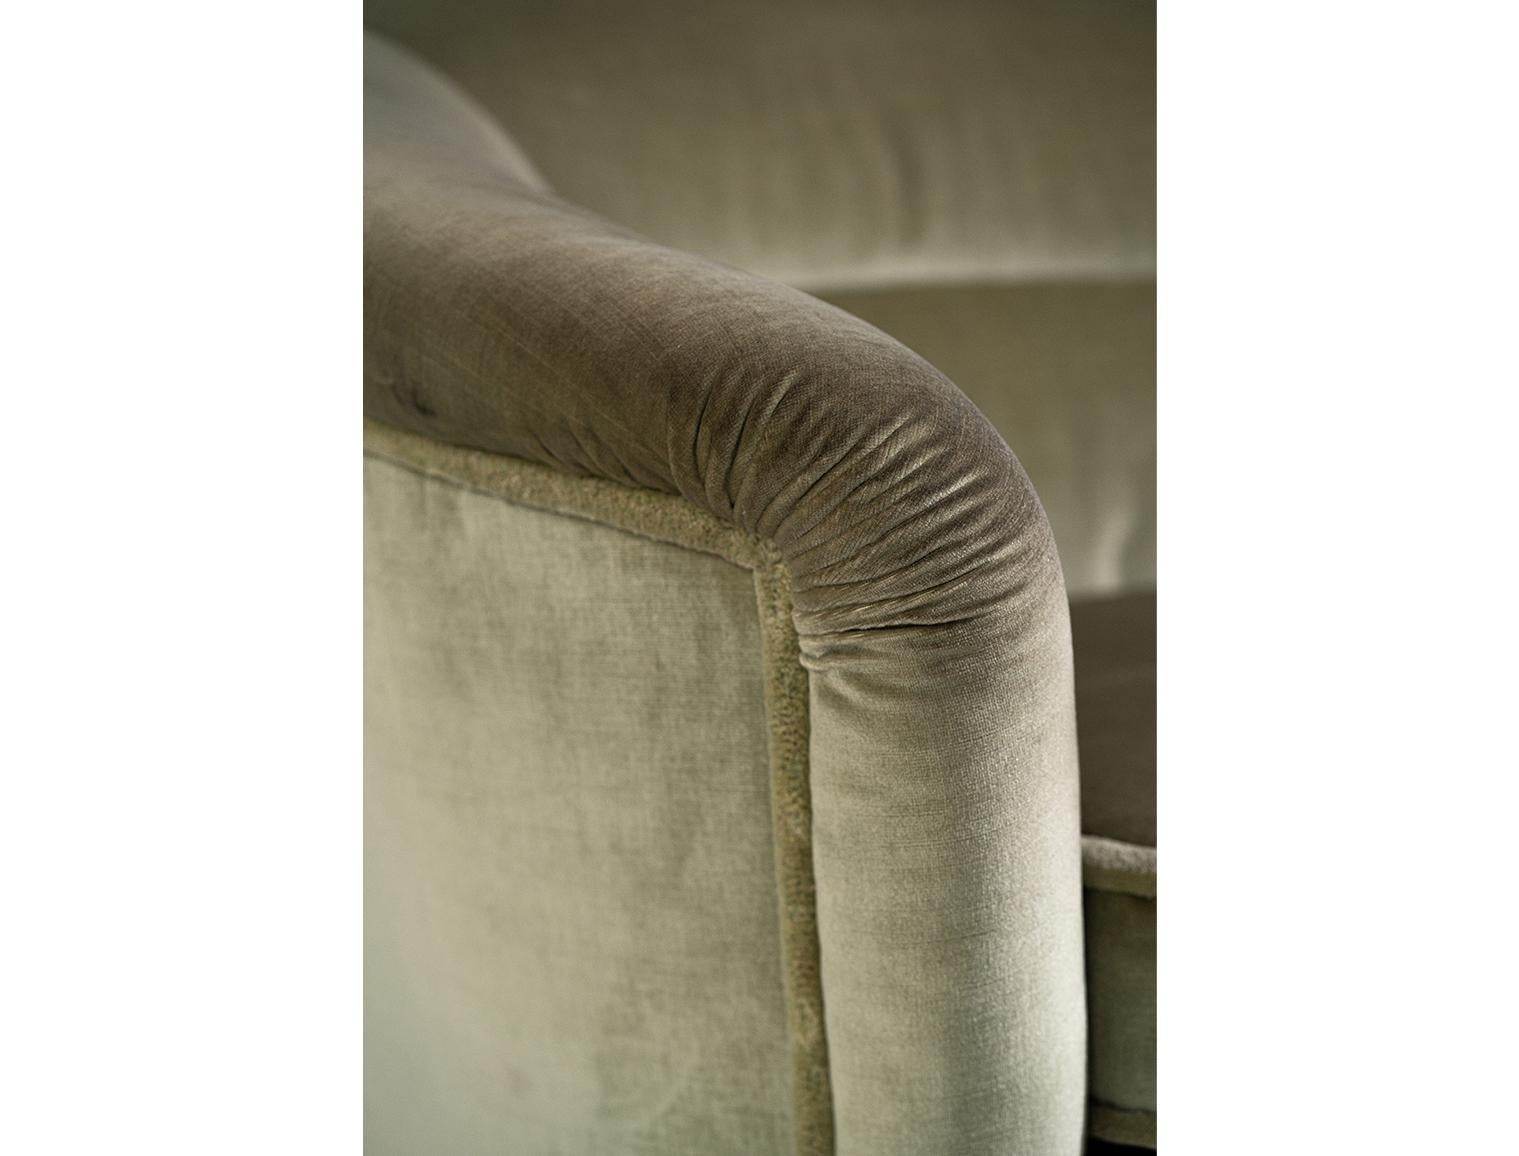 Swedish Club Lounge Chairs from the 1930/40s with Original Mohair Fabric, Detailed Legs